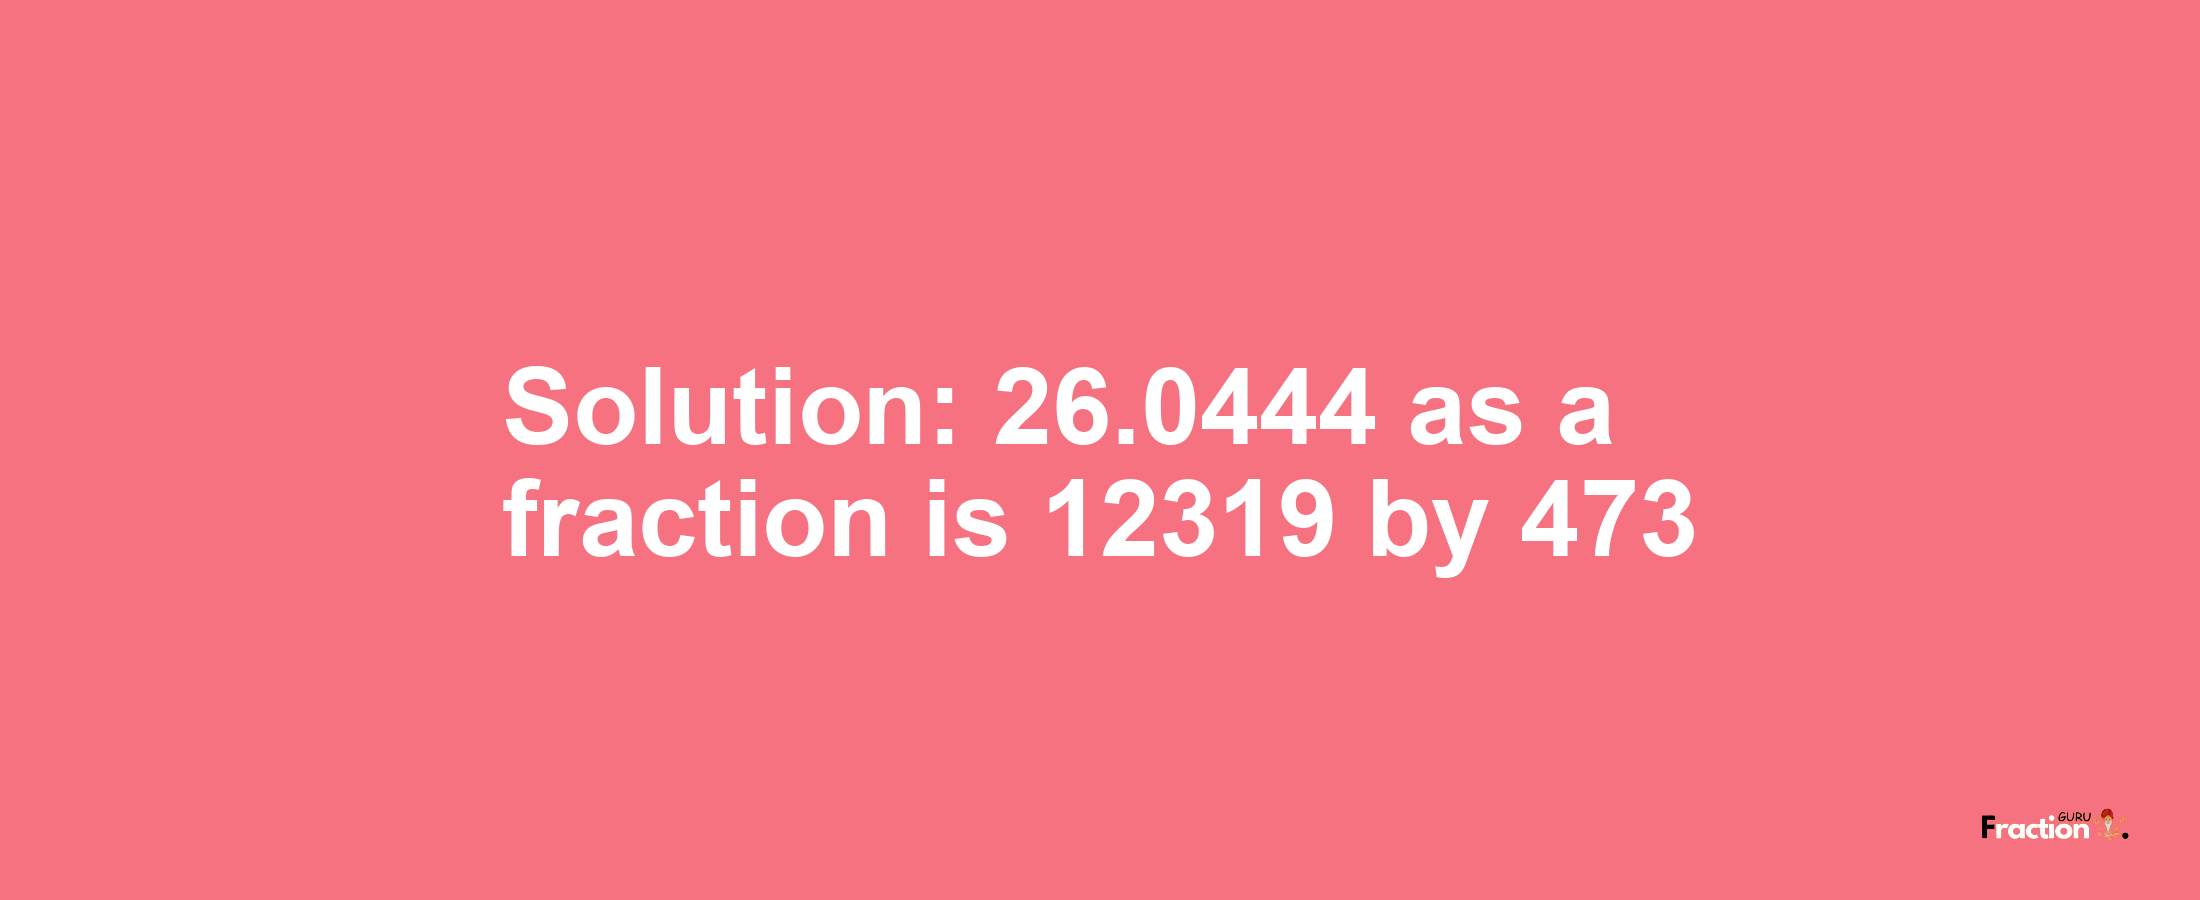 Solution:26.0444 as a fraction is 12319/473